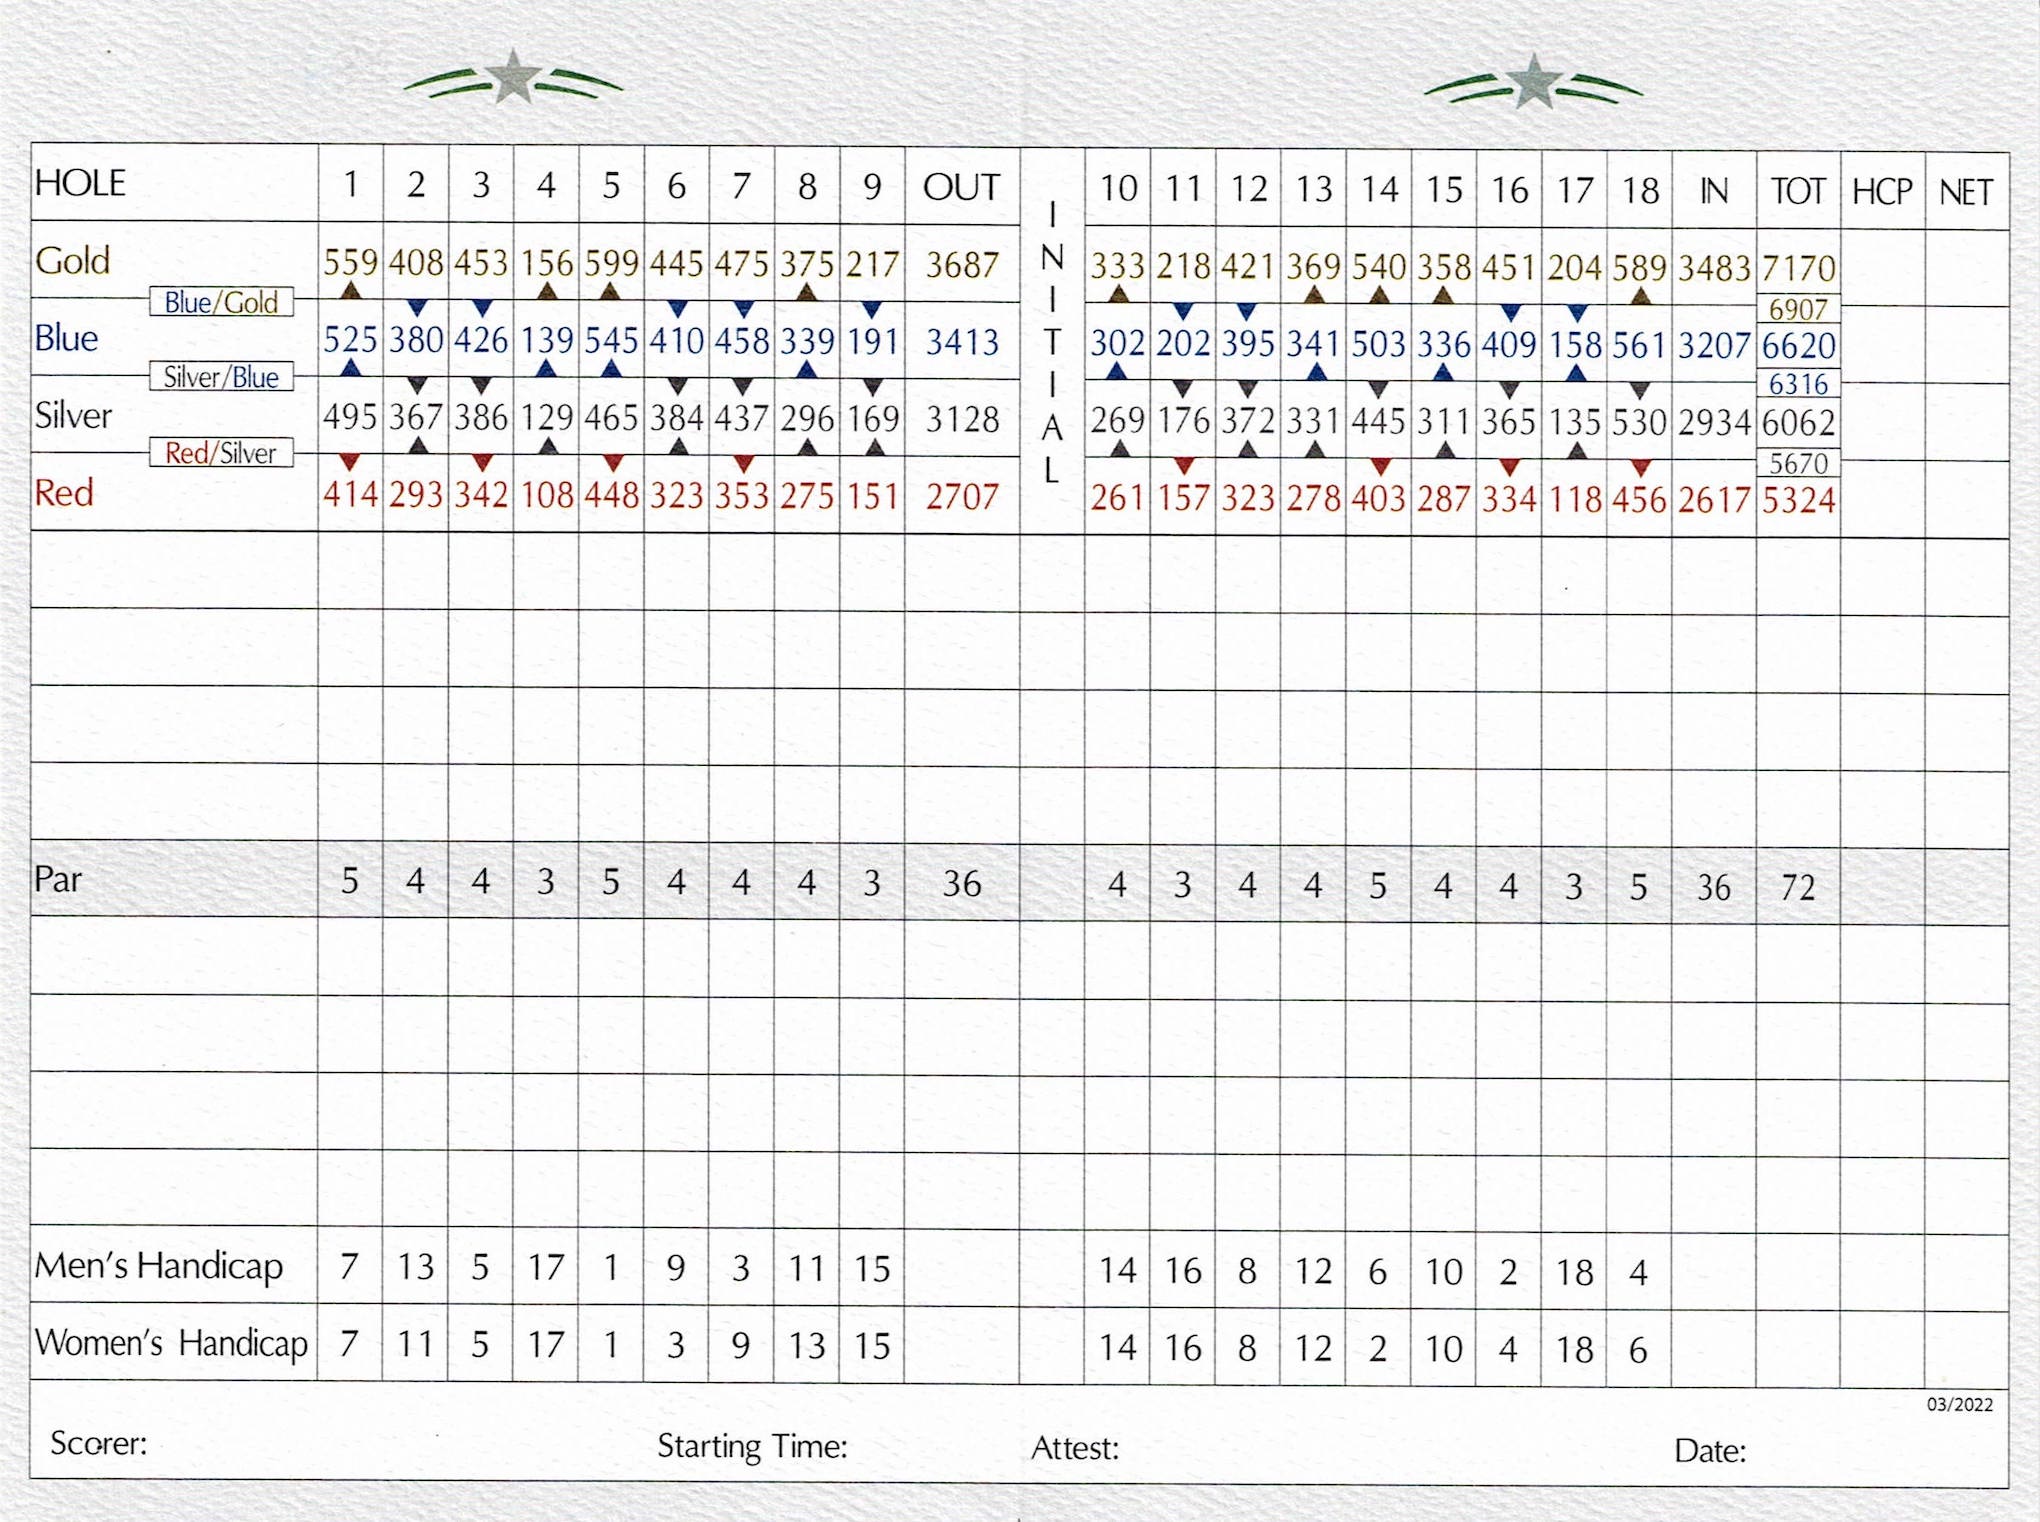 Scan of the scorecard from The Glen Club in Glenview, Illinois. 